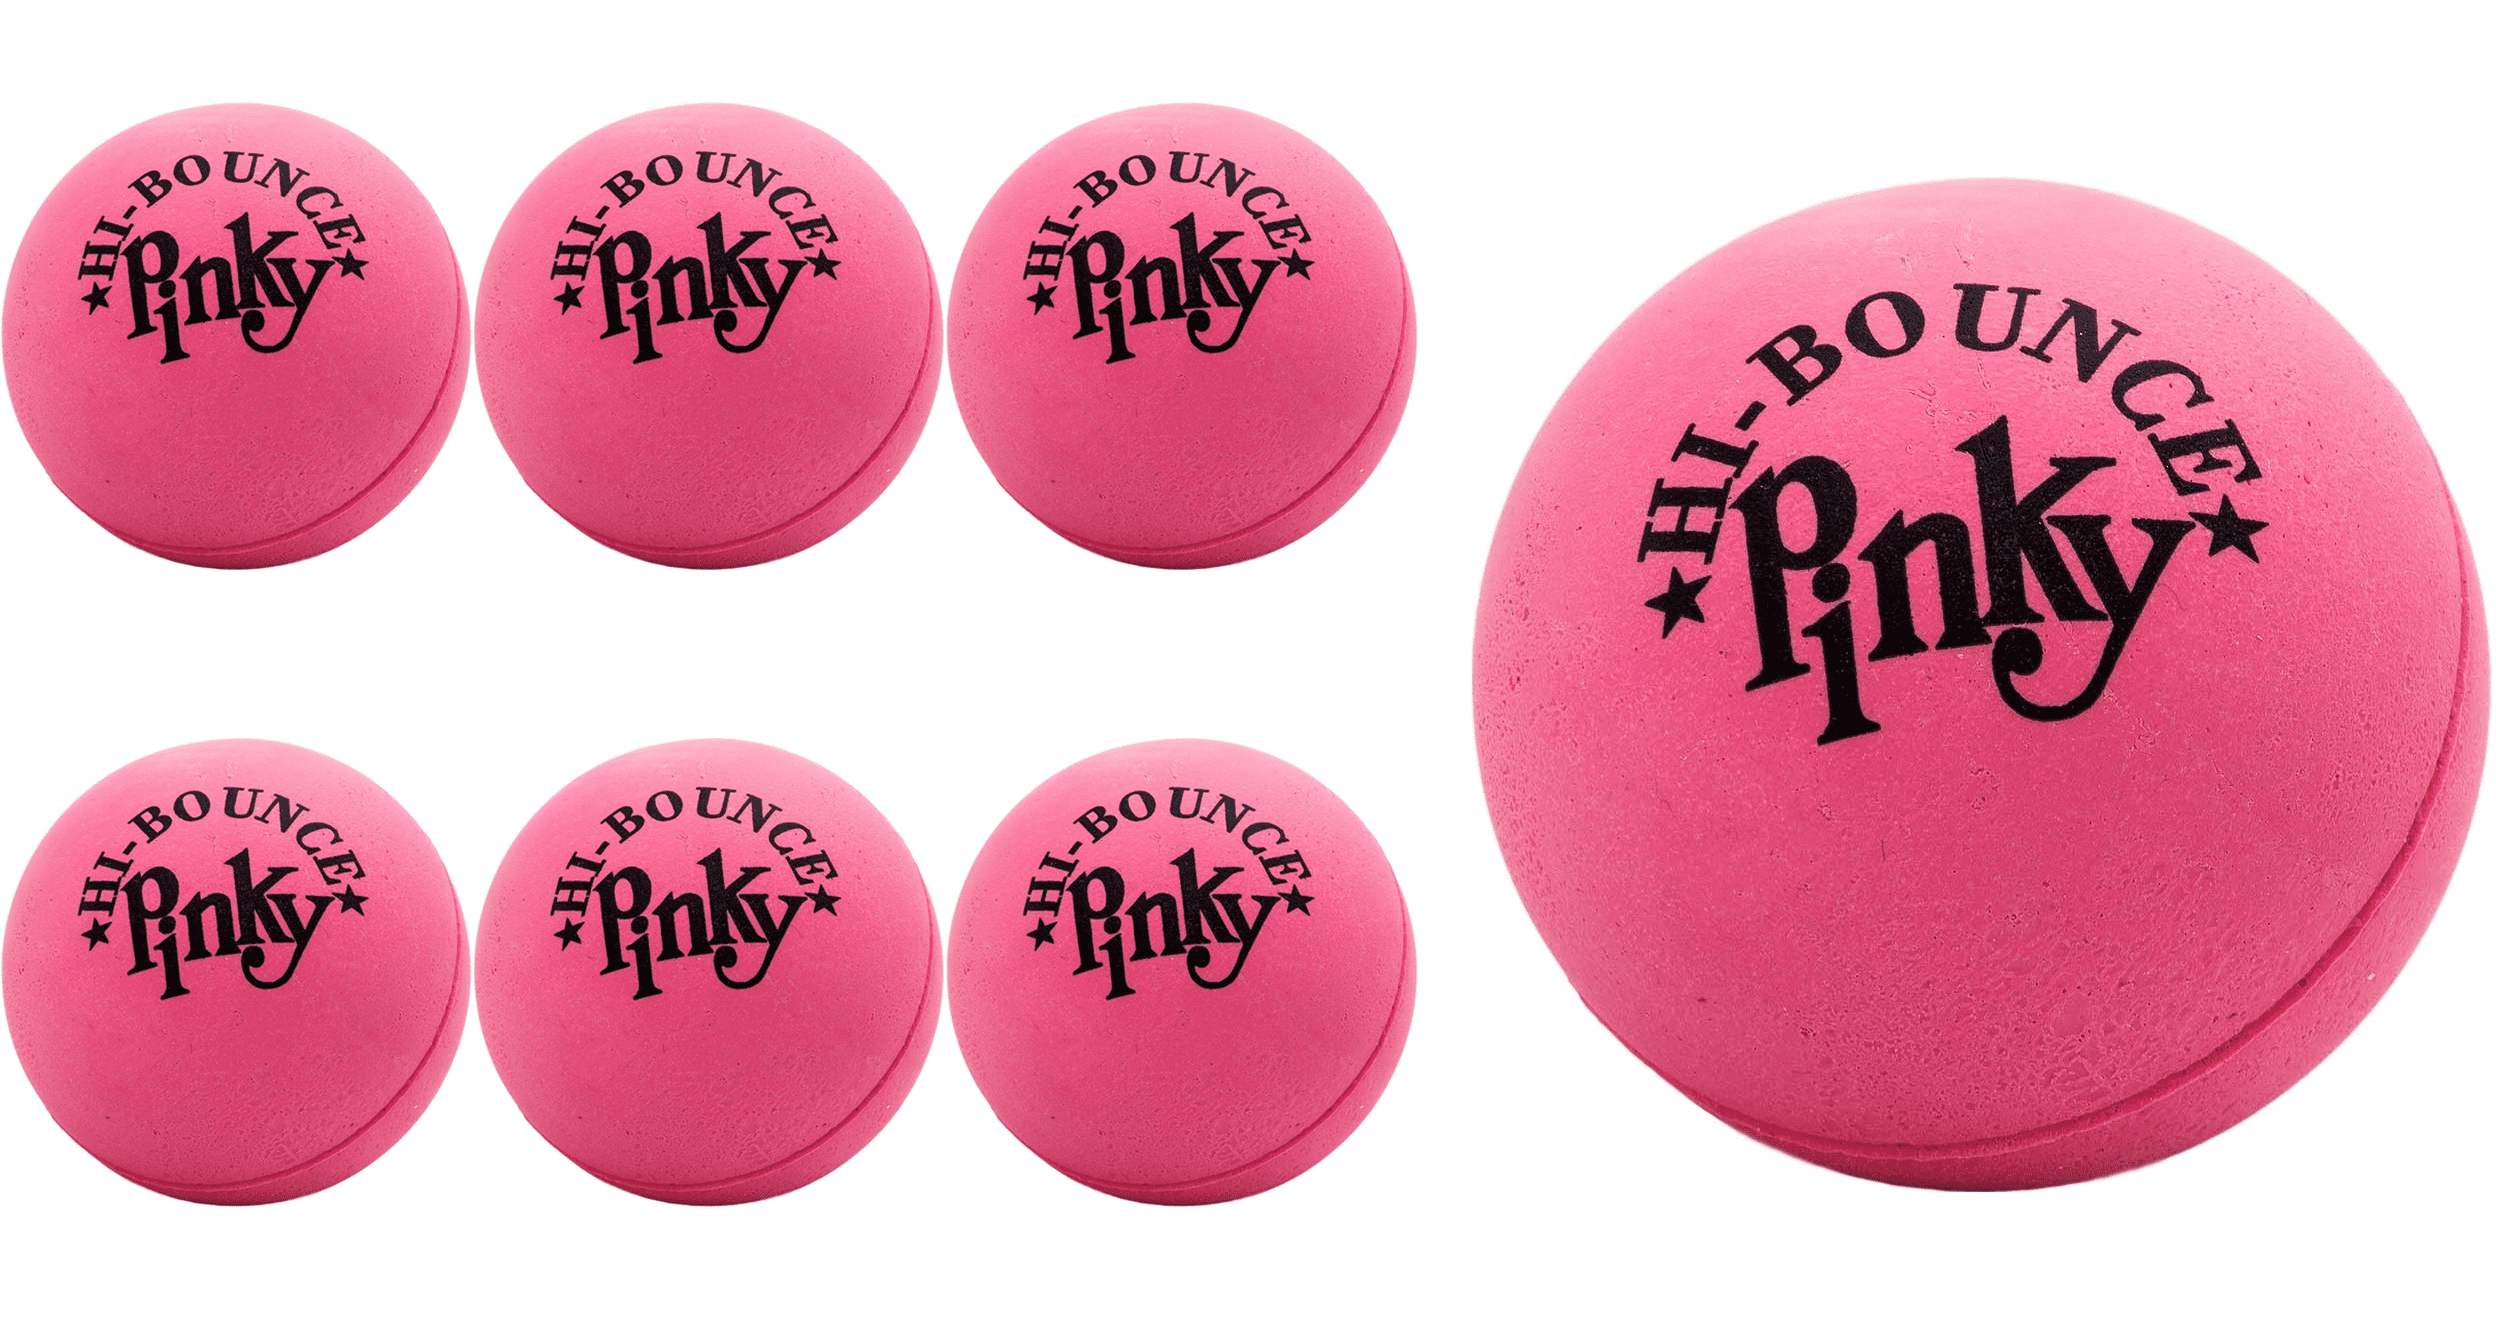 Pinky Ball Pack Of 1 2.5" Hi Bounce LARGE PINK Rubber Balls For Play Or 